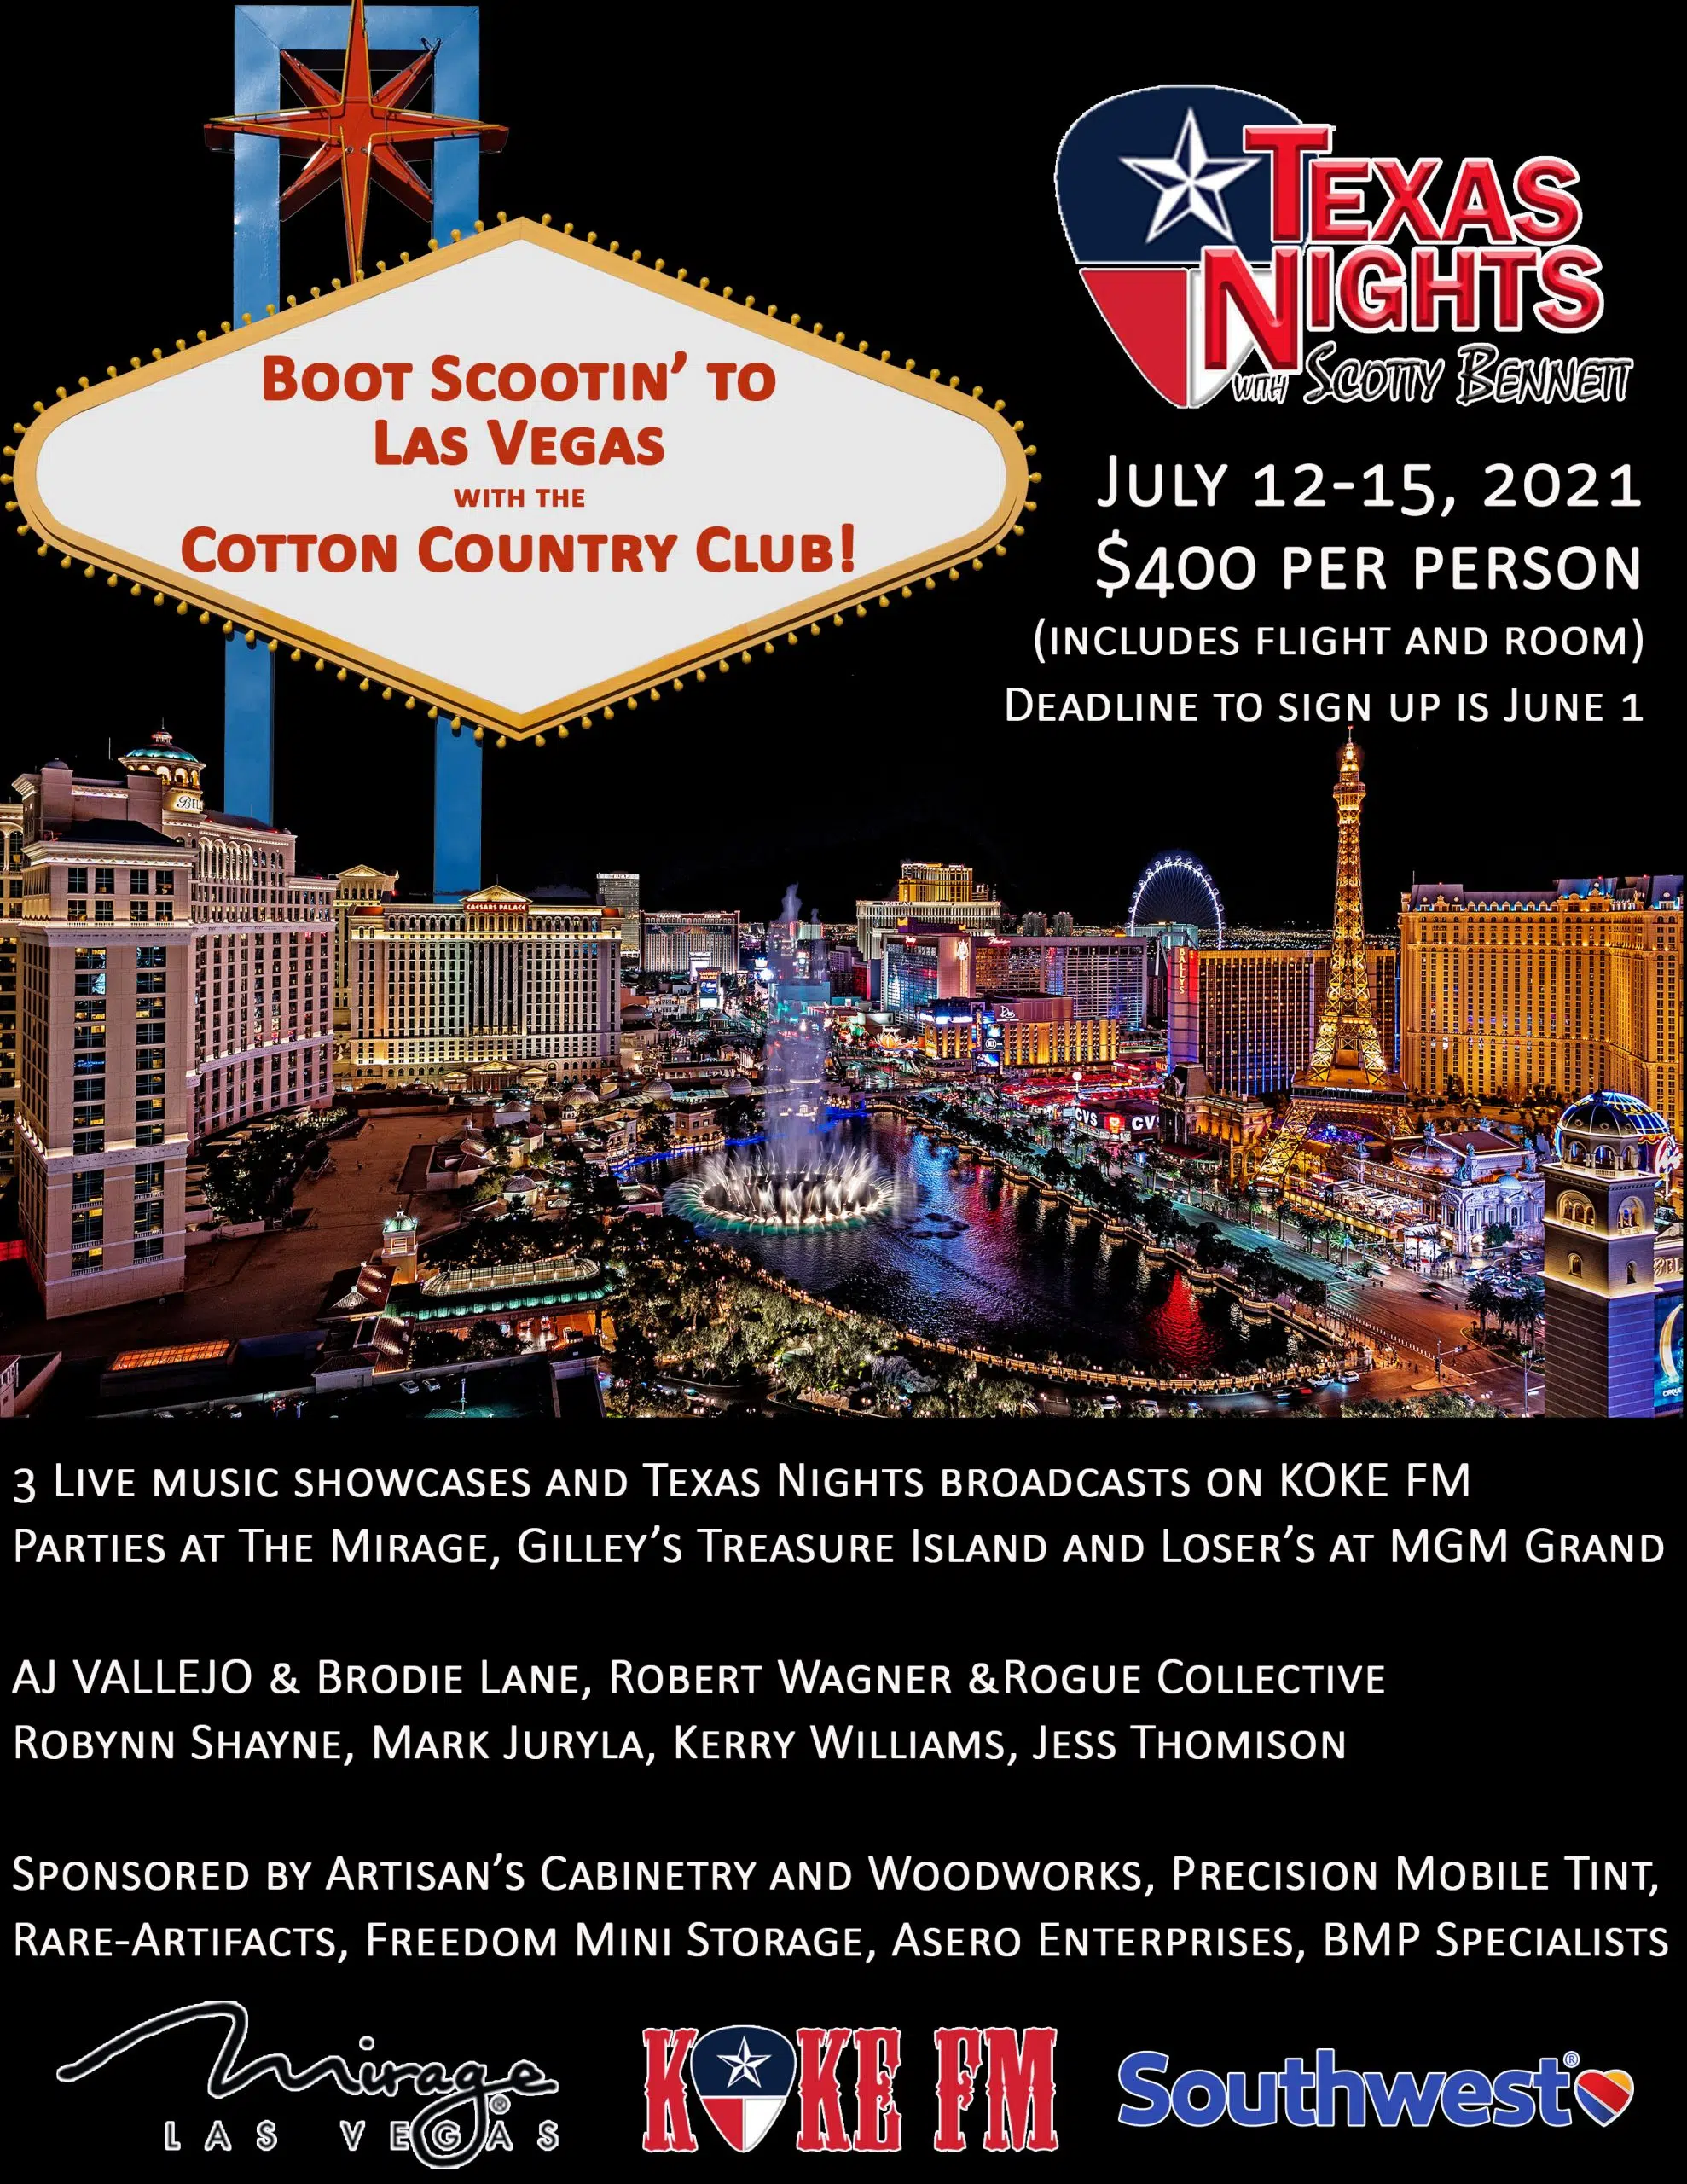 Texas Nights is going to Vegas with the Cotton Country Club July12-15!